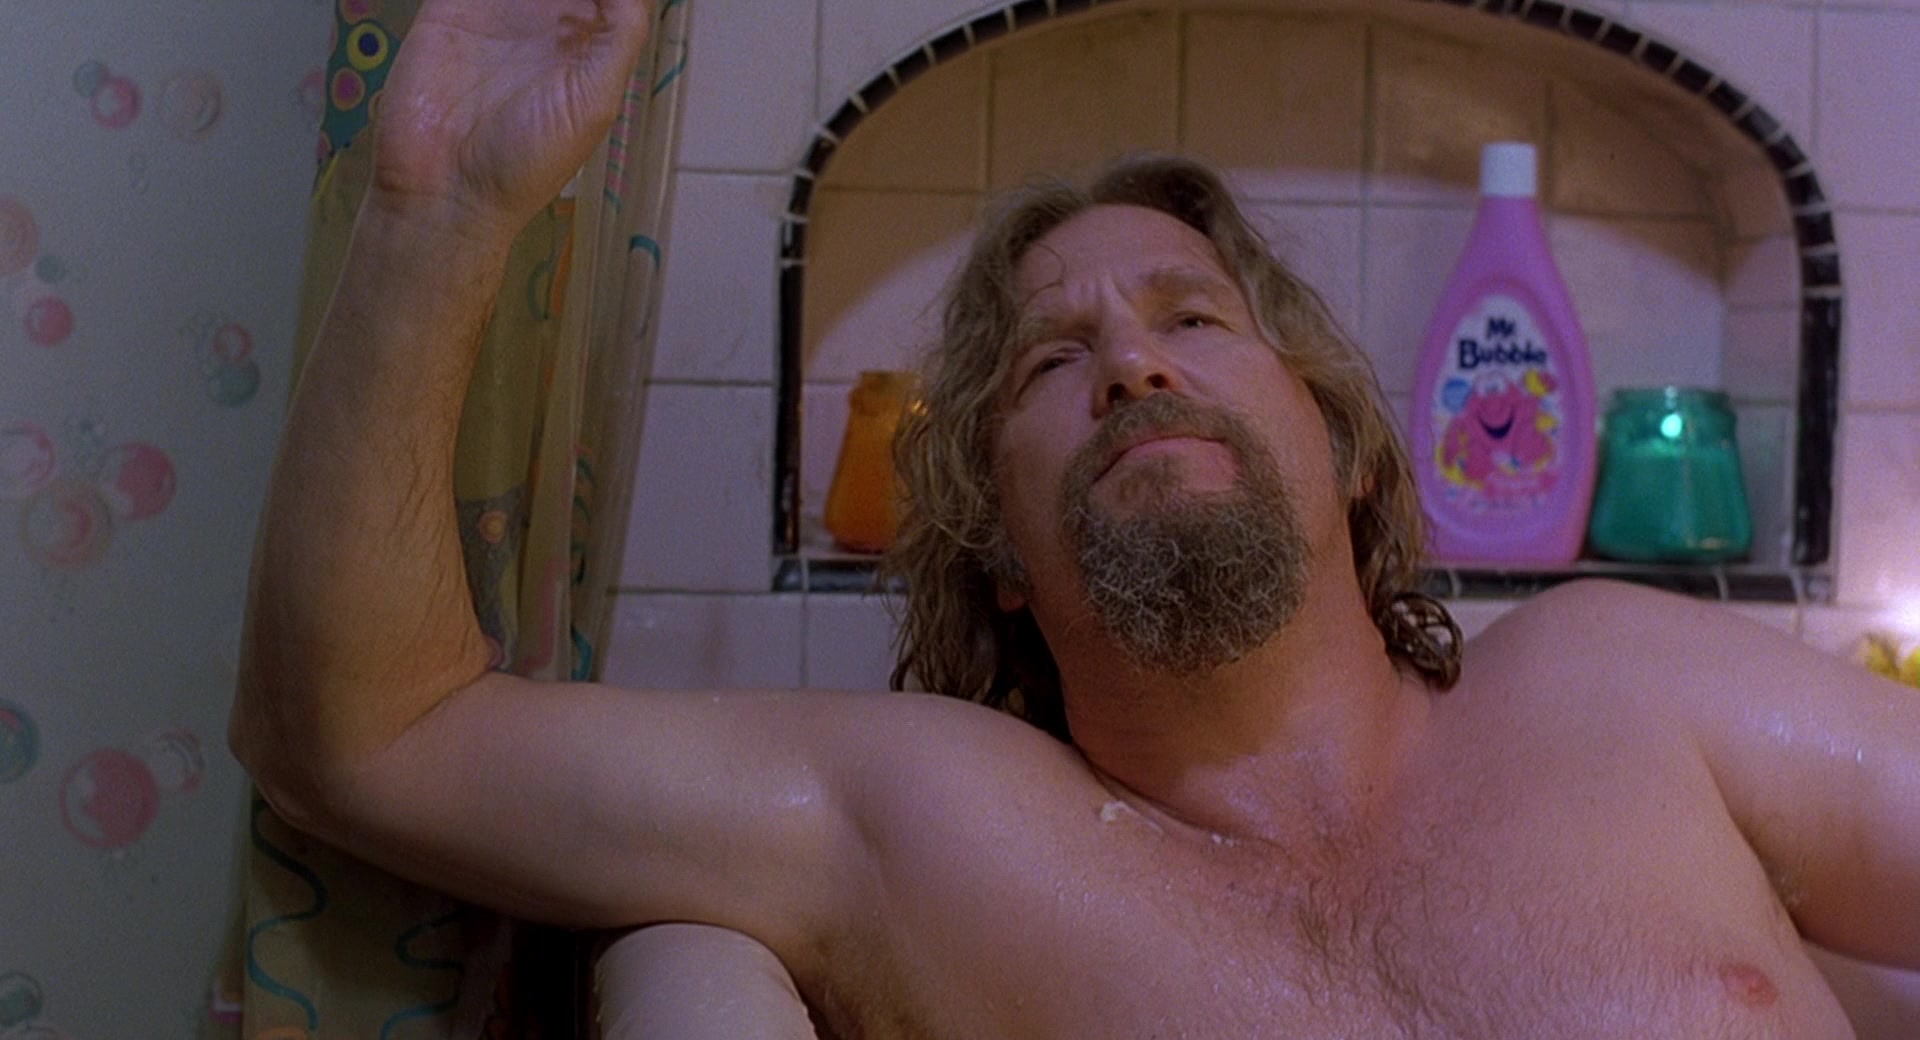 Mr. Bubble Used by Jeff Bridges (The Dude) in The Big Lebowski (1998). 